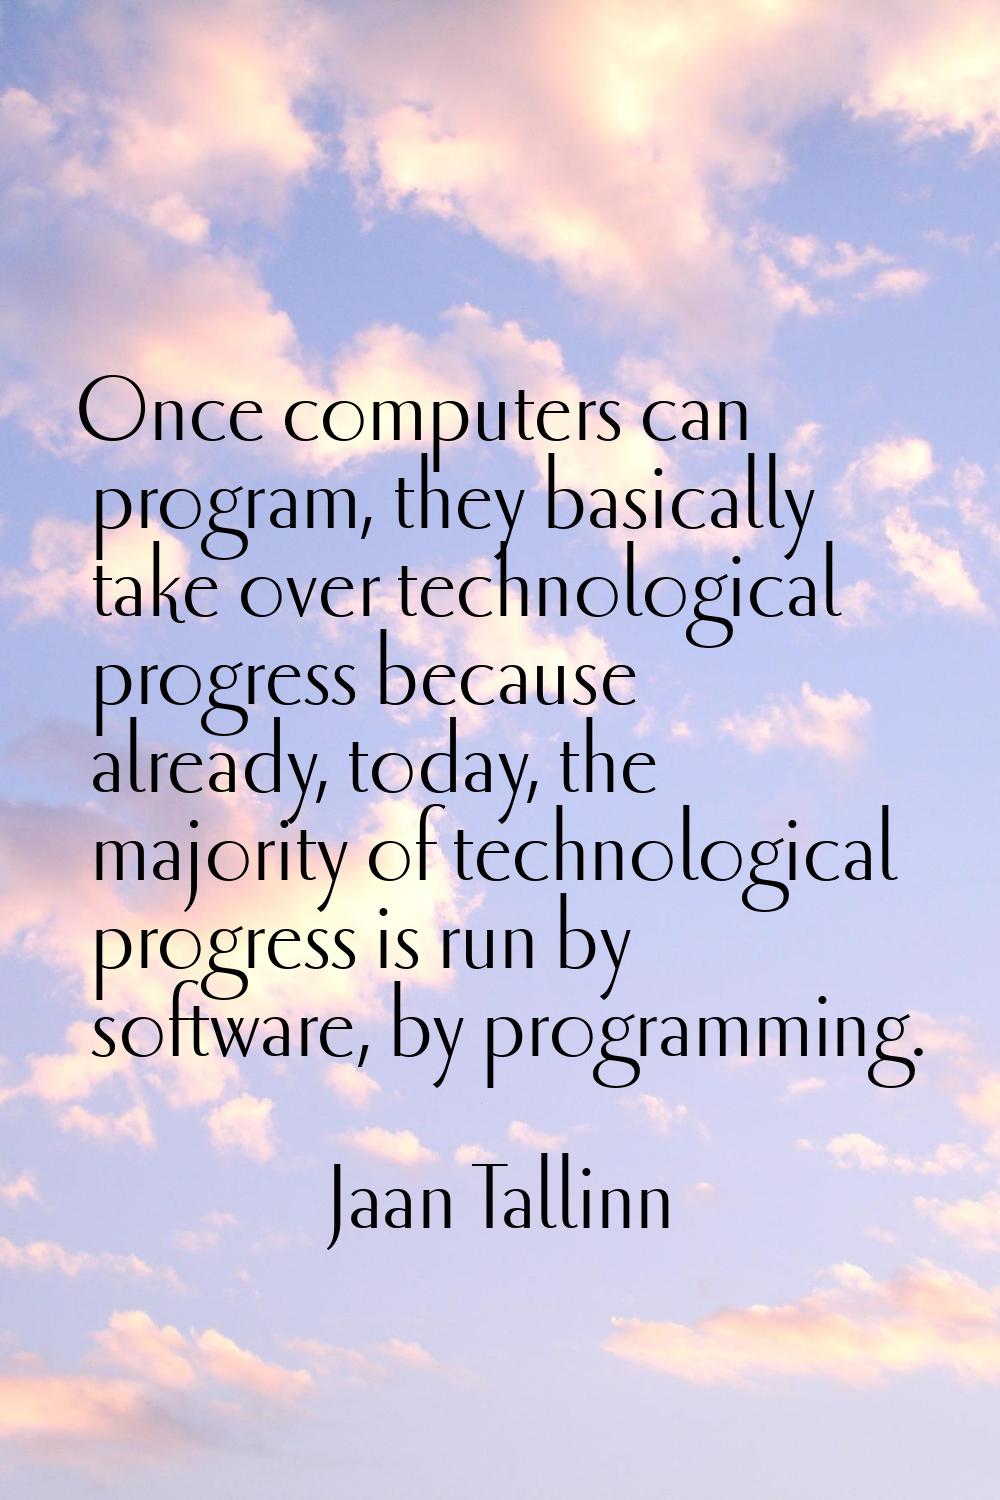 Once computers can program, they basically take over technological progress because already, today,